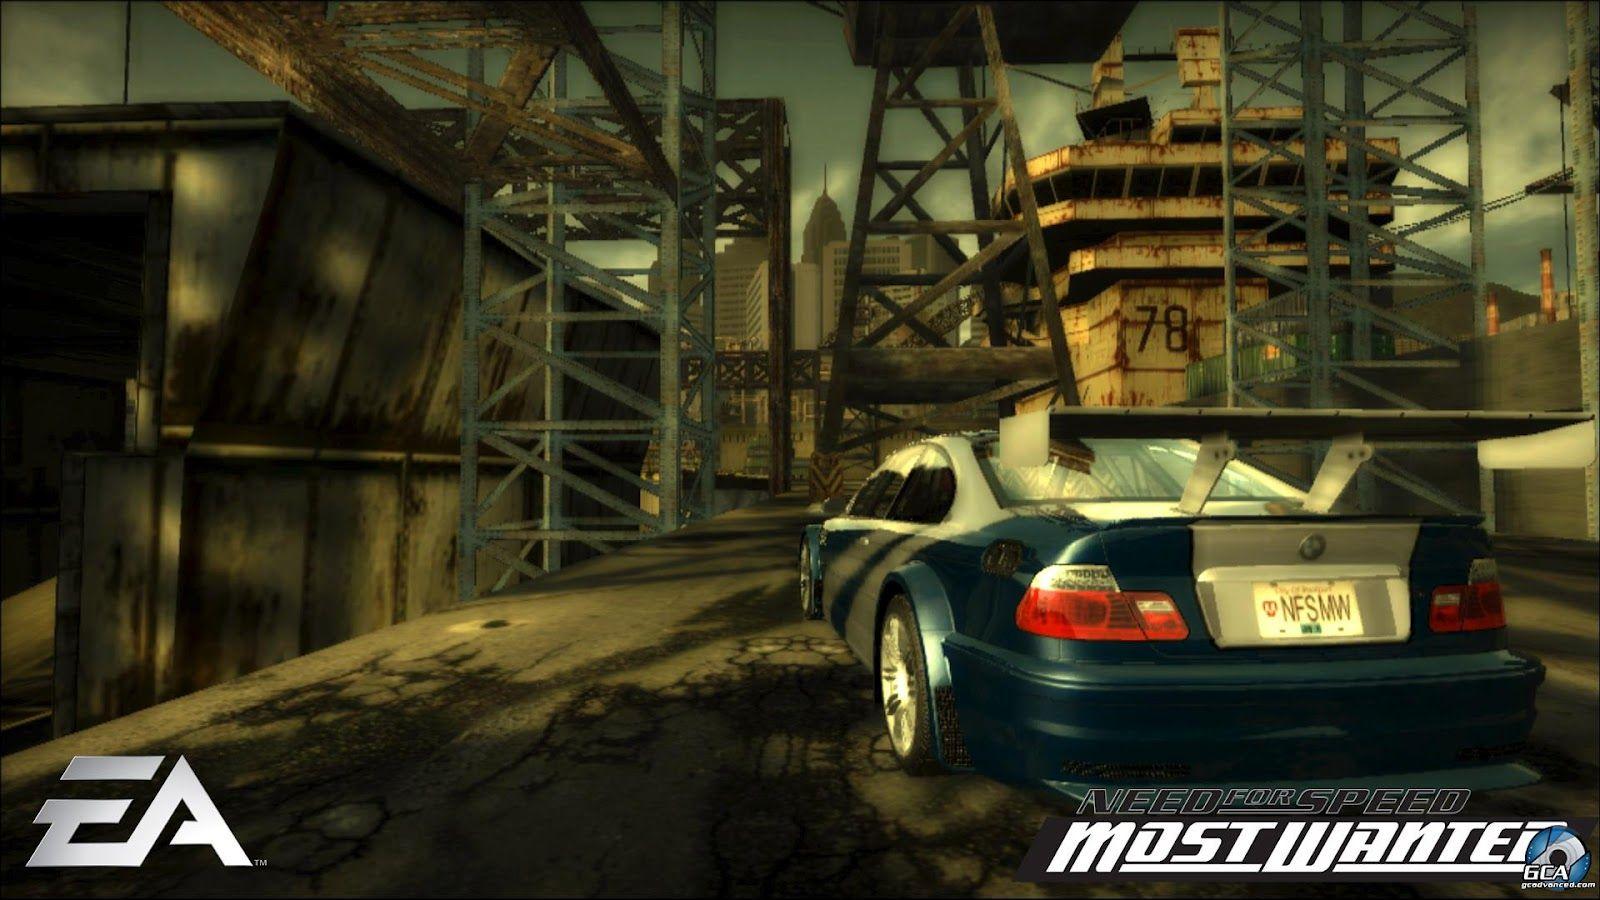 all new pix1: HD Nfs Most Wanted Wallpaper